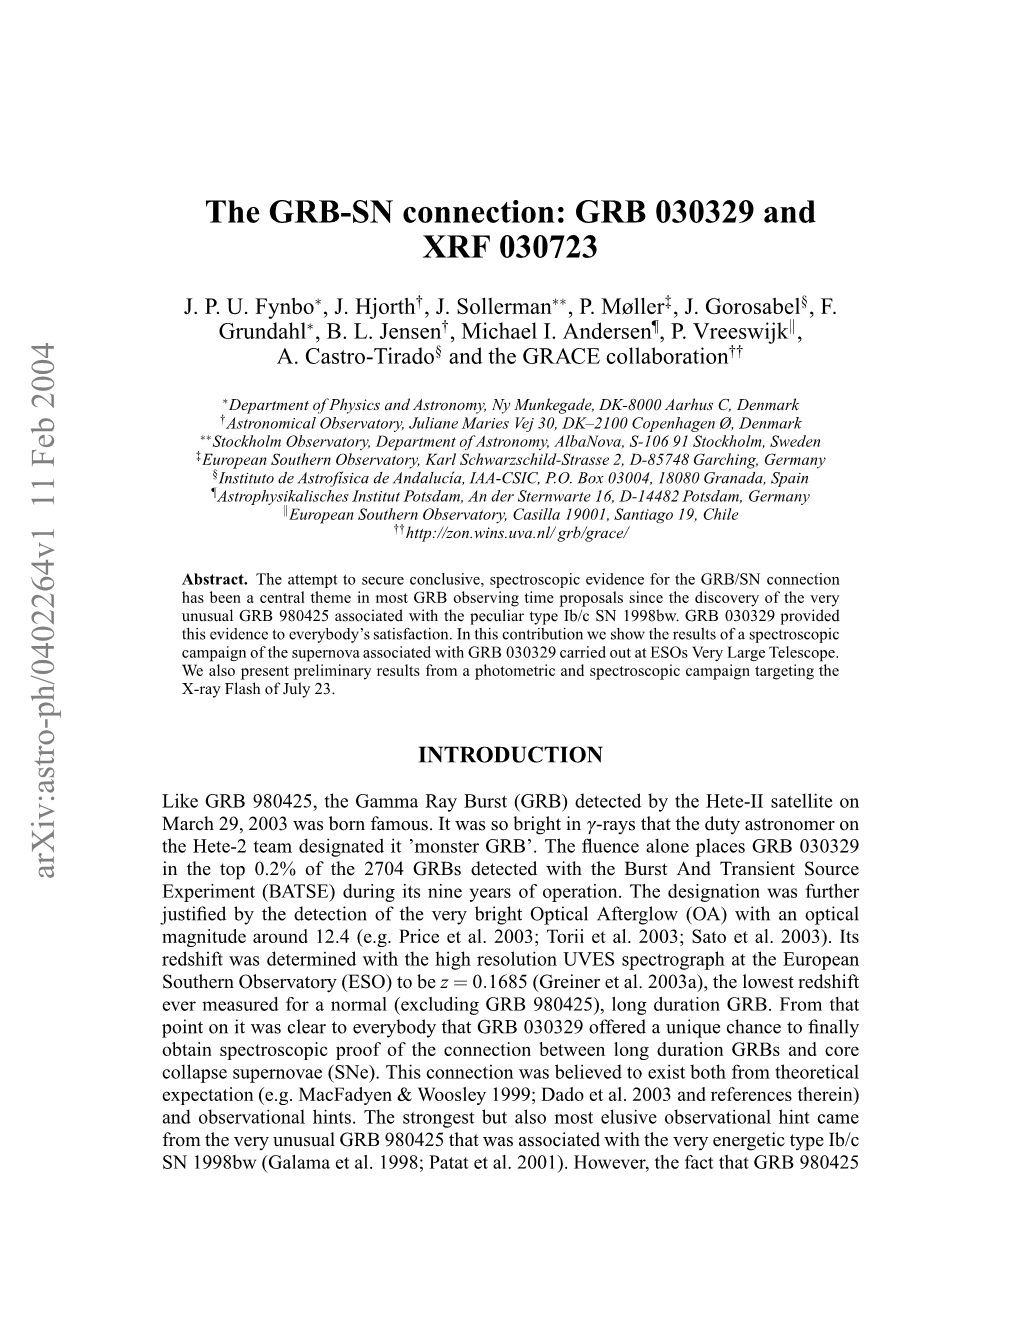 The GRB-SN Connection: GRB030329 and XRF030723